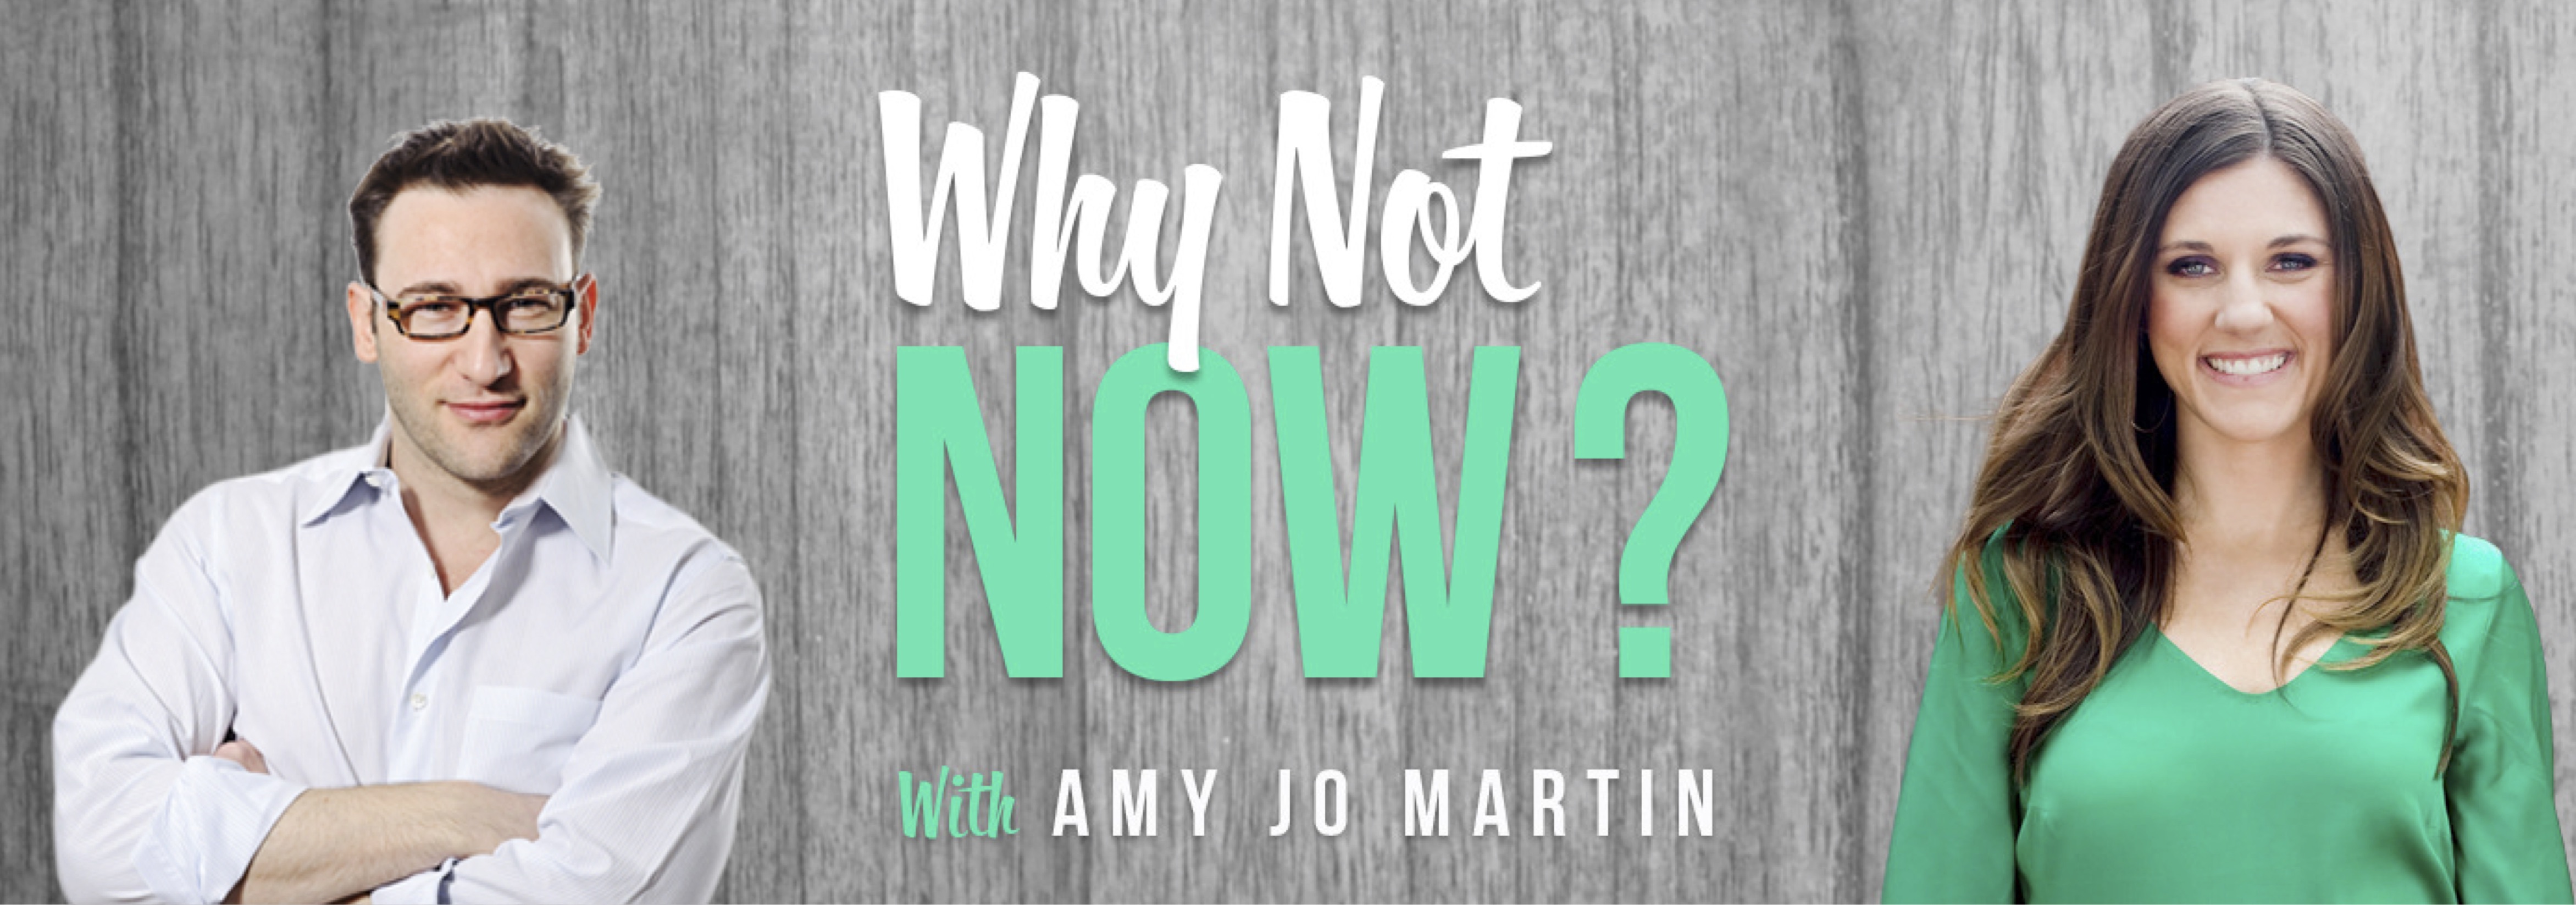 Why Not Now Podcast Amy Jo Martin Speaks With Simon Sinek